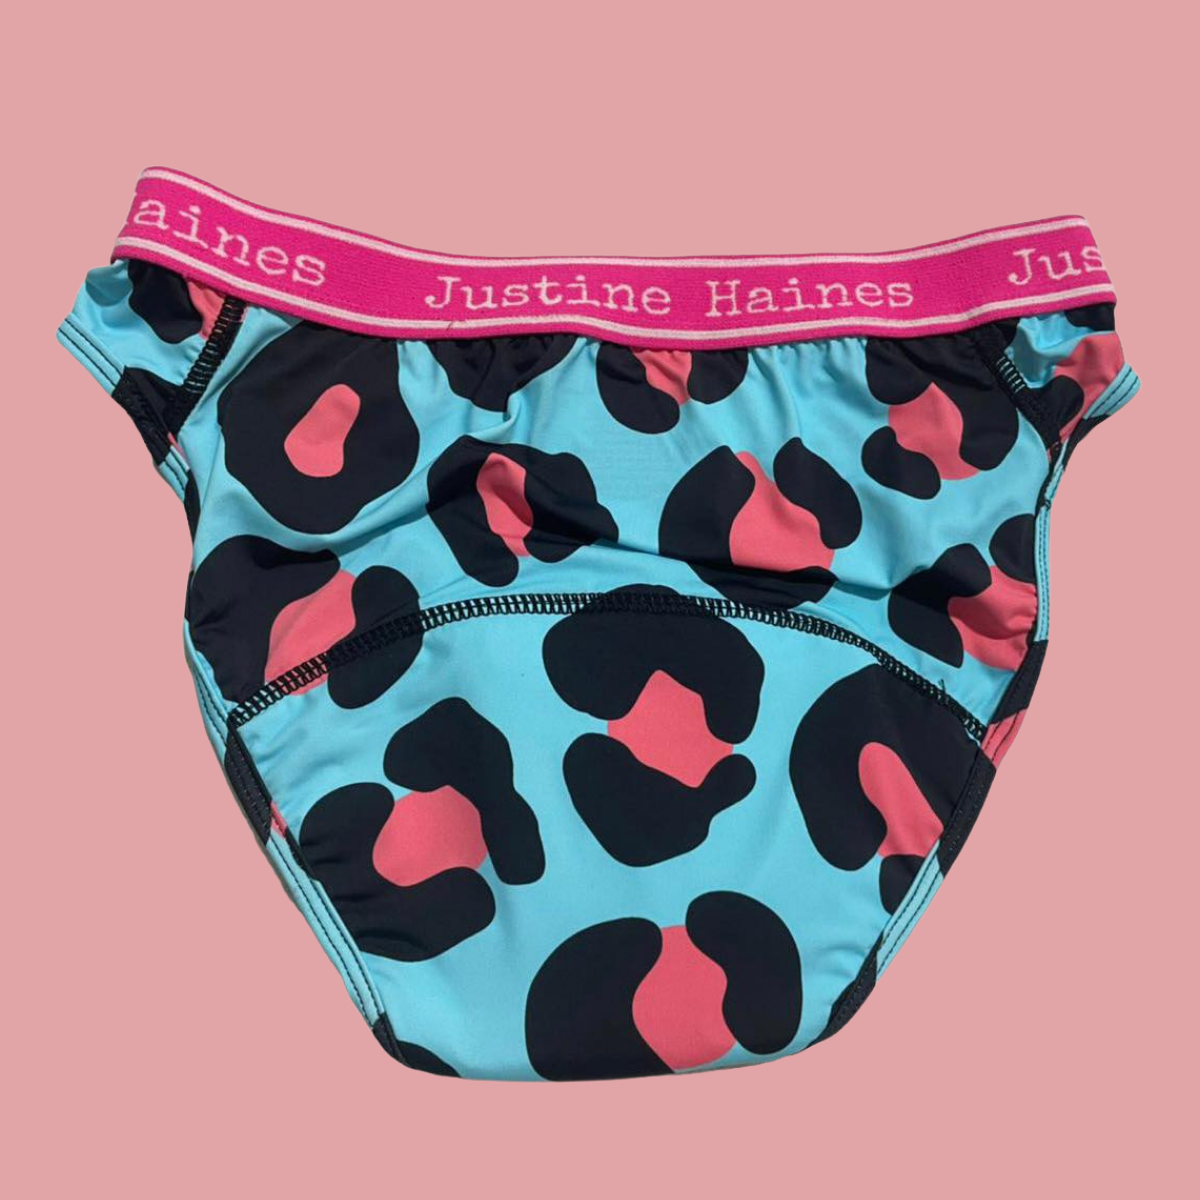 https://www.justinehaines.com/products/adorable-low-rise-fashion-print-period-panties-in-cool-blue-animal